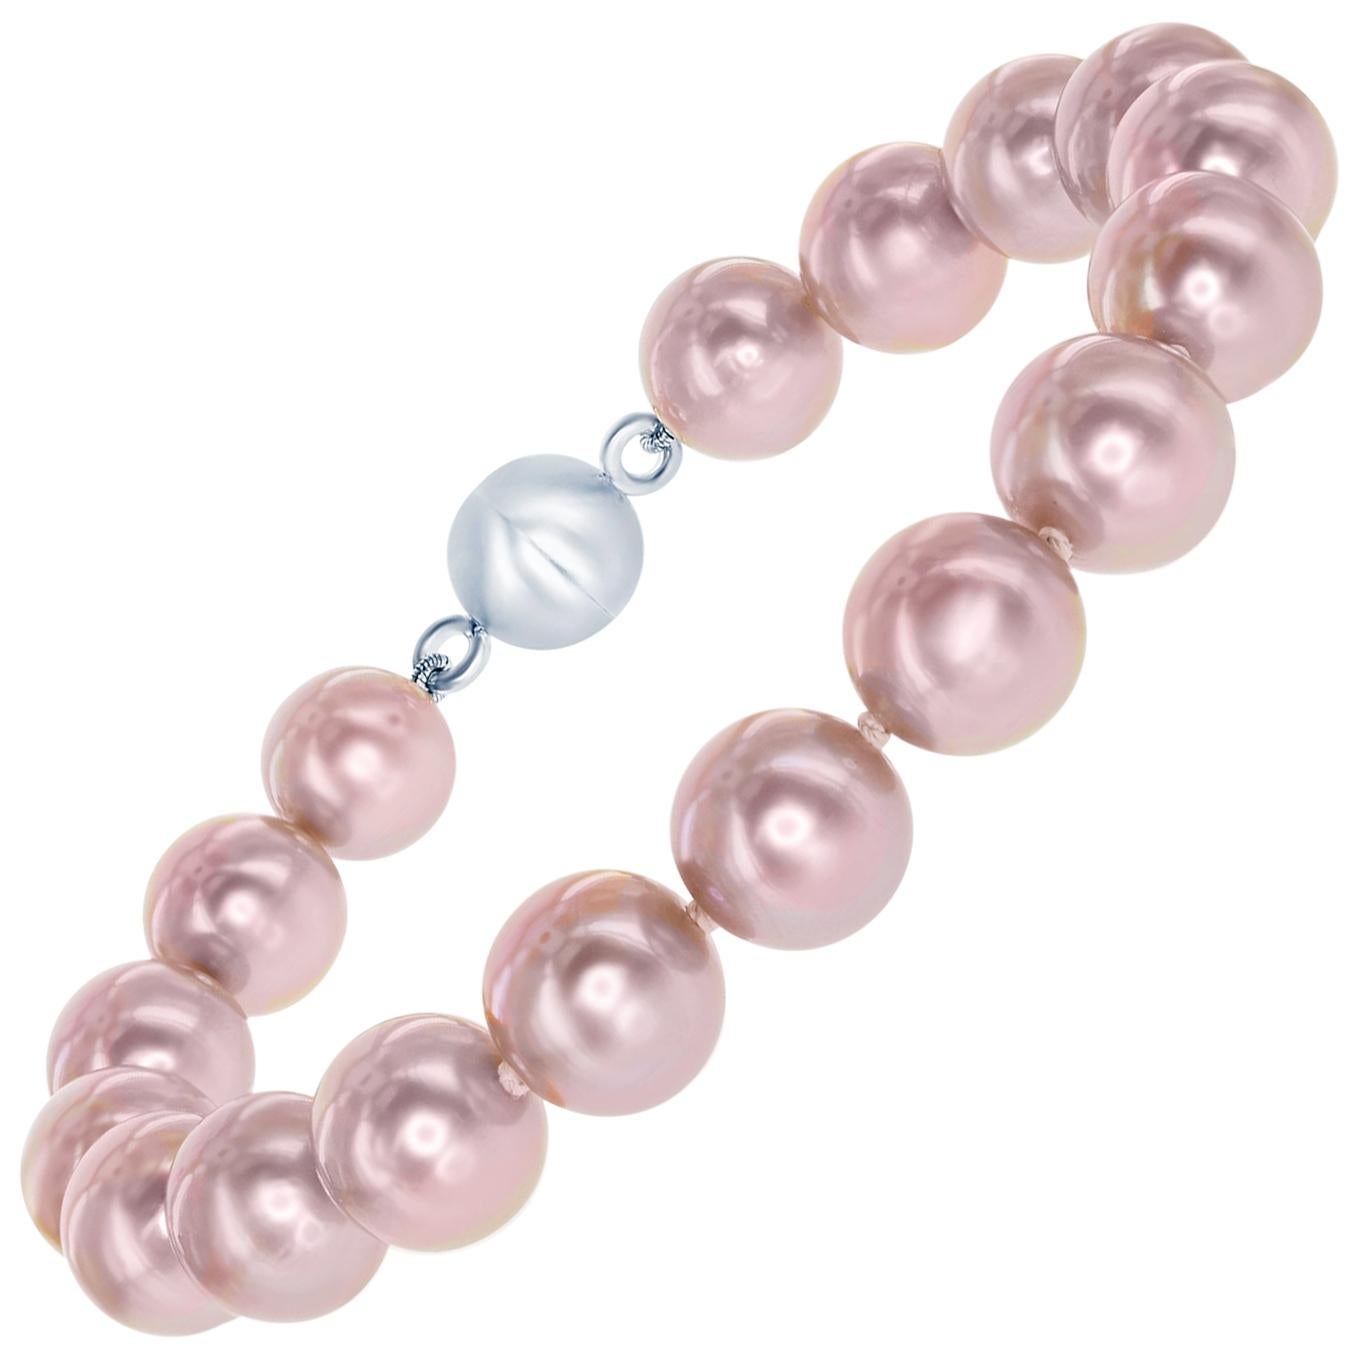 Sterling Silver 6-6.5mm Dyed-grey Freshwater Cultured Pearl Necklace with Ball-clasp 18